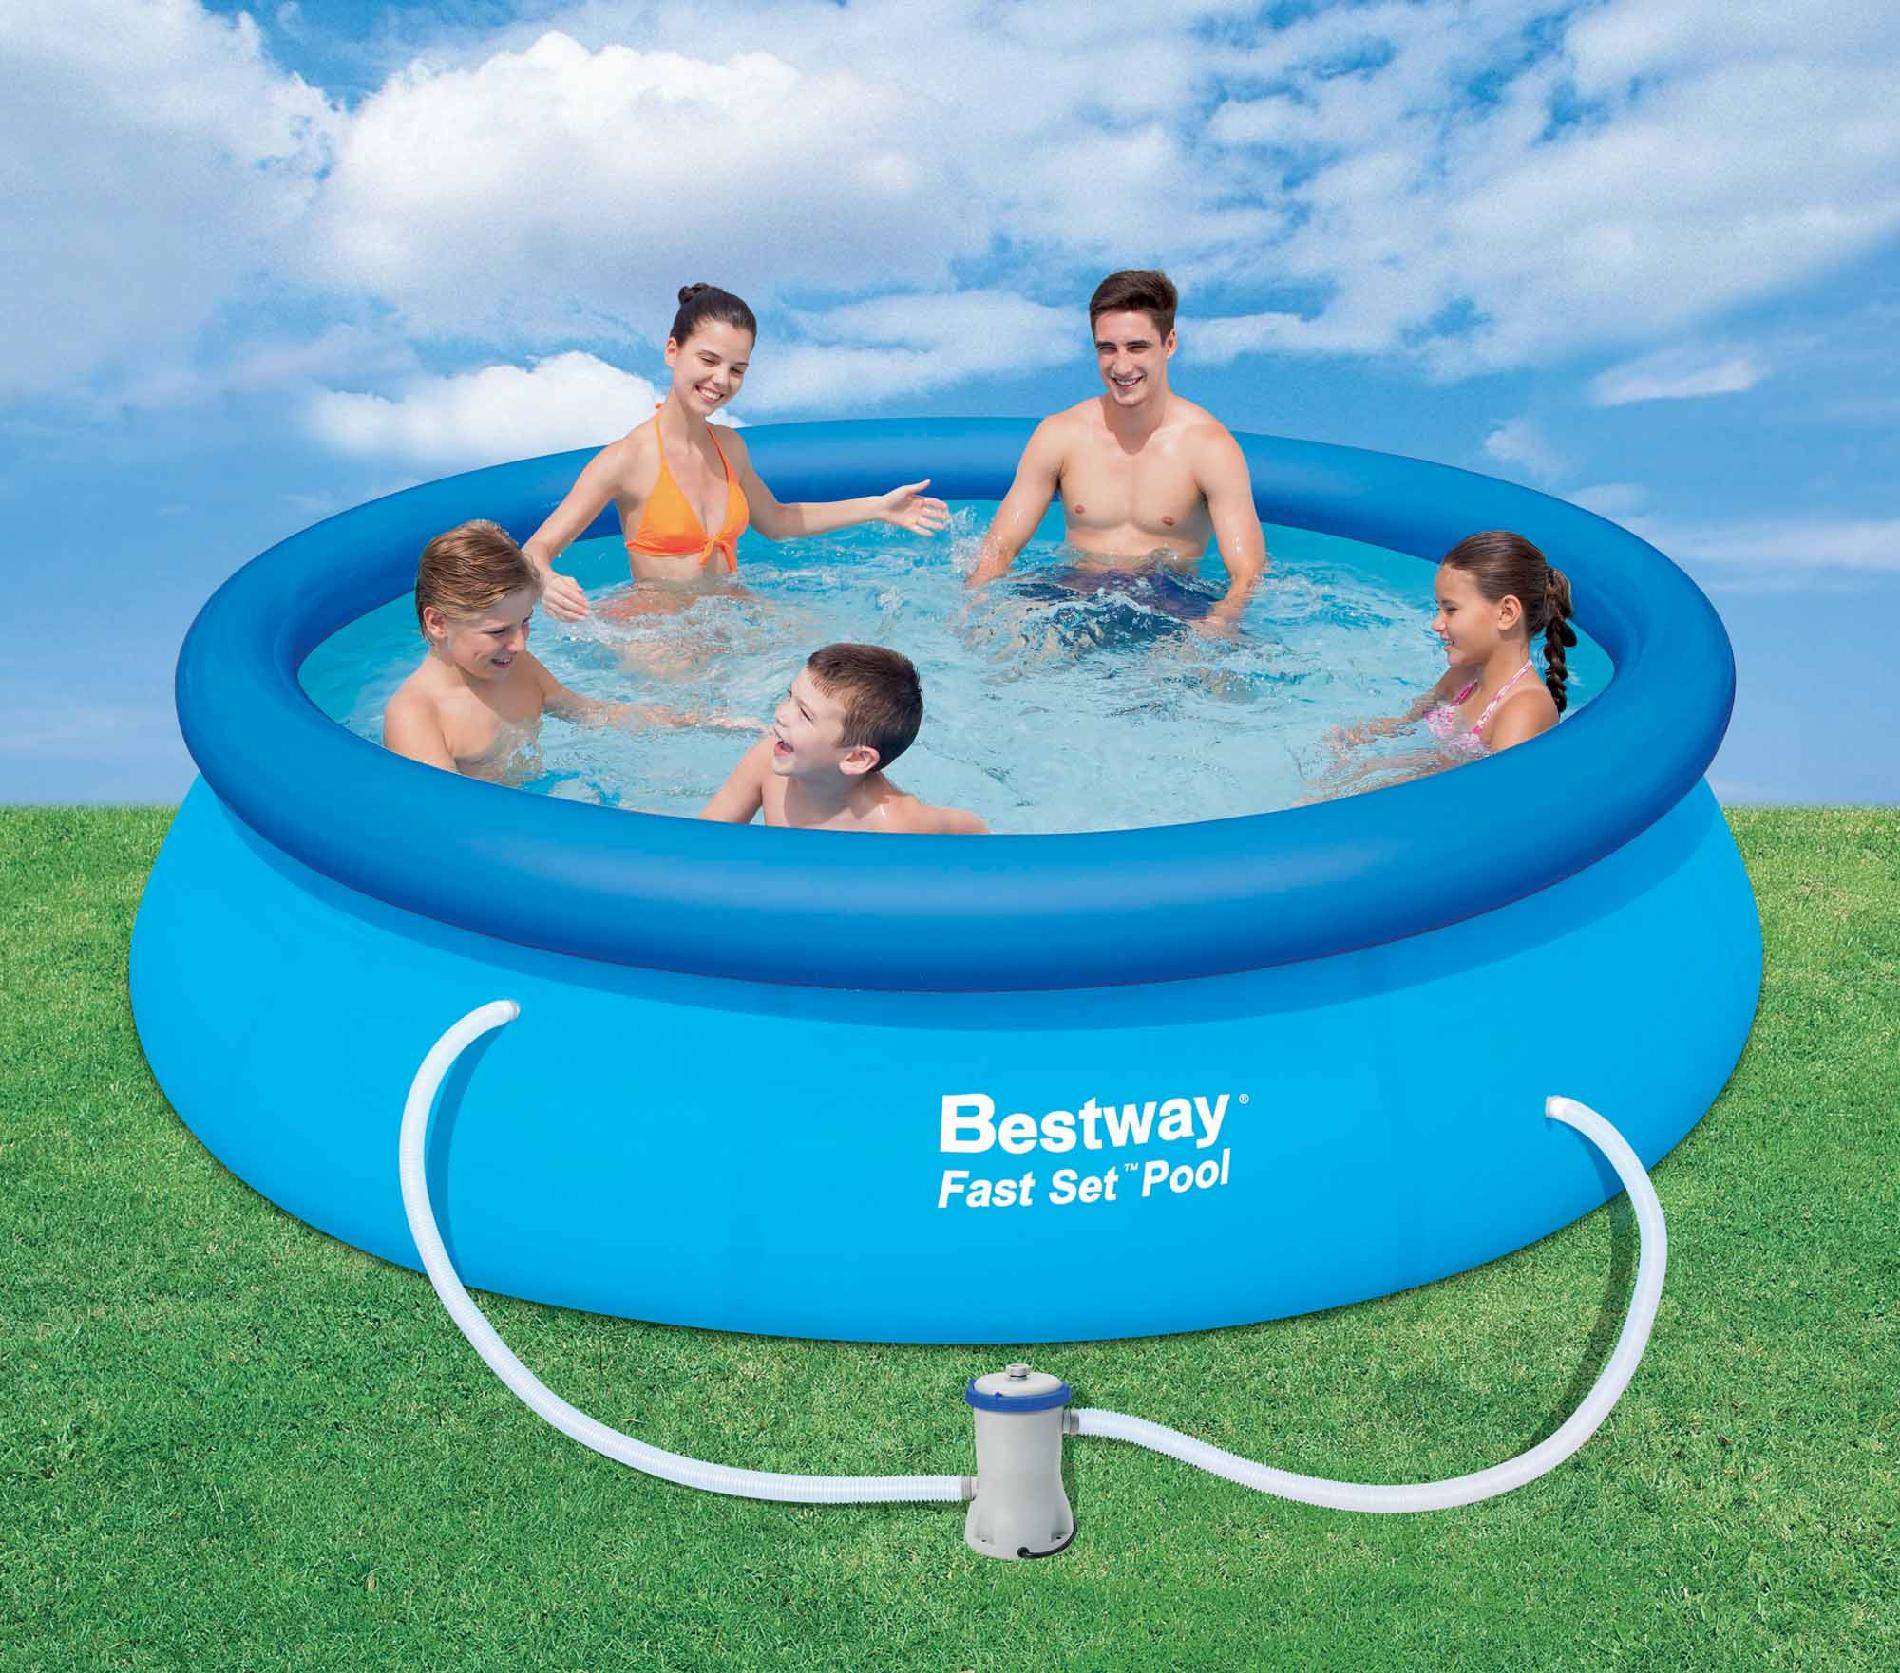 Bestway 10′ x 30″ Inflatable Fast Set Pool Kit Only $59.99!